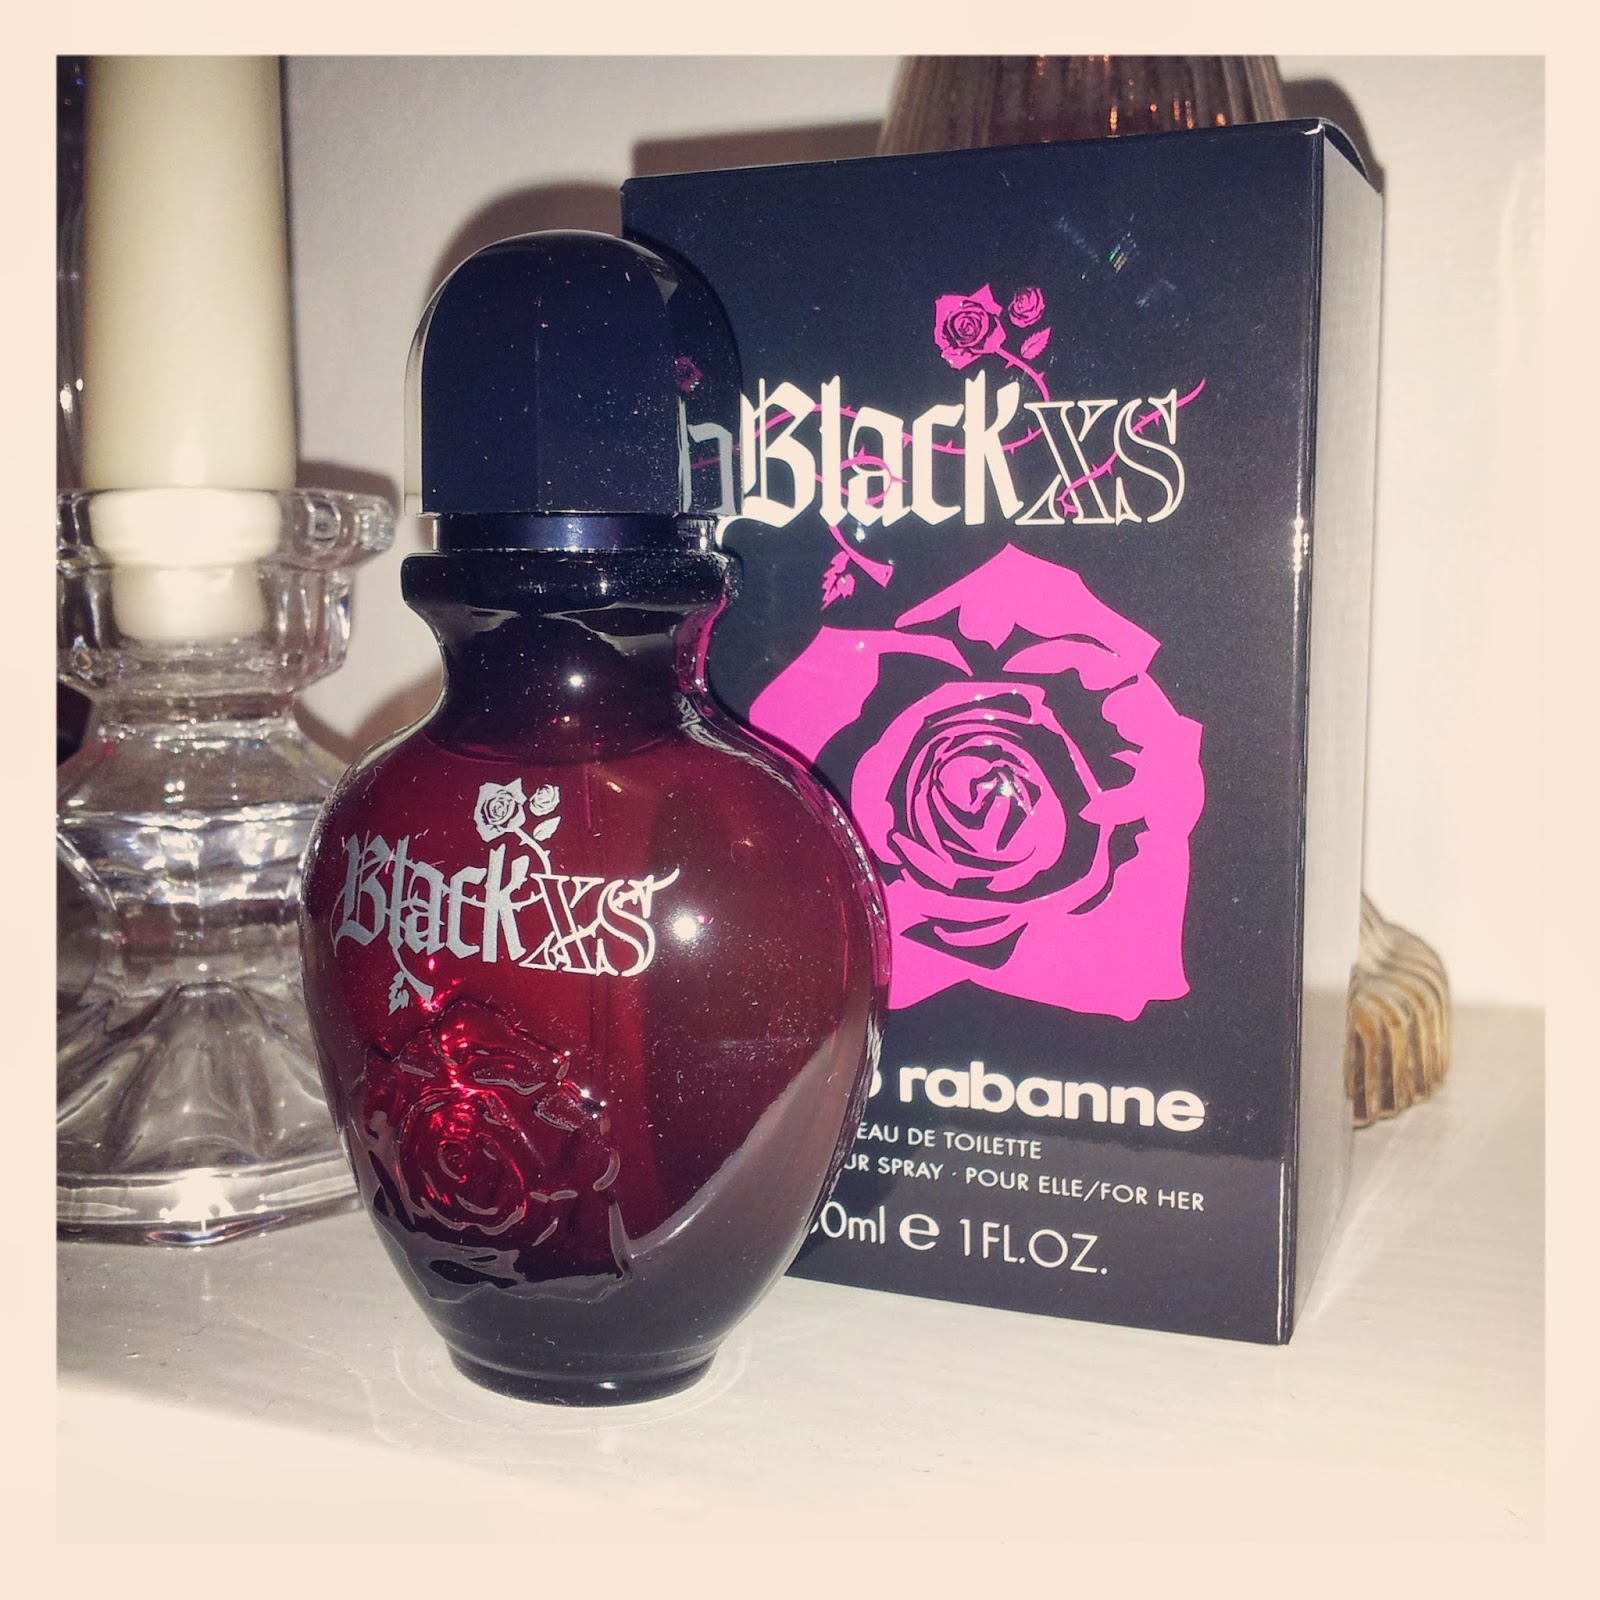 Likes and Love : Paco Rabanne Black XS perfume: review